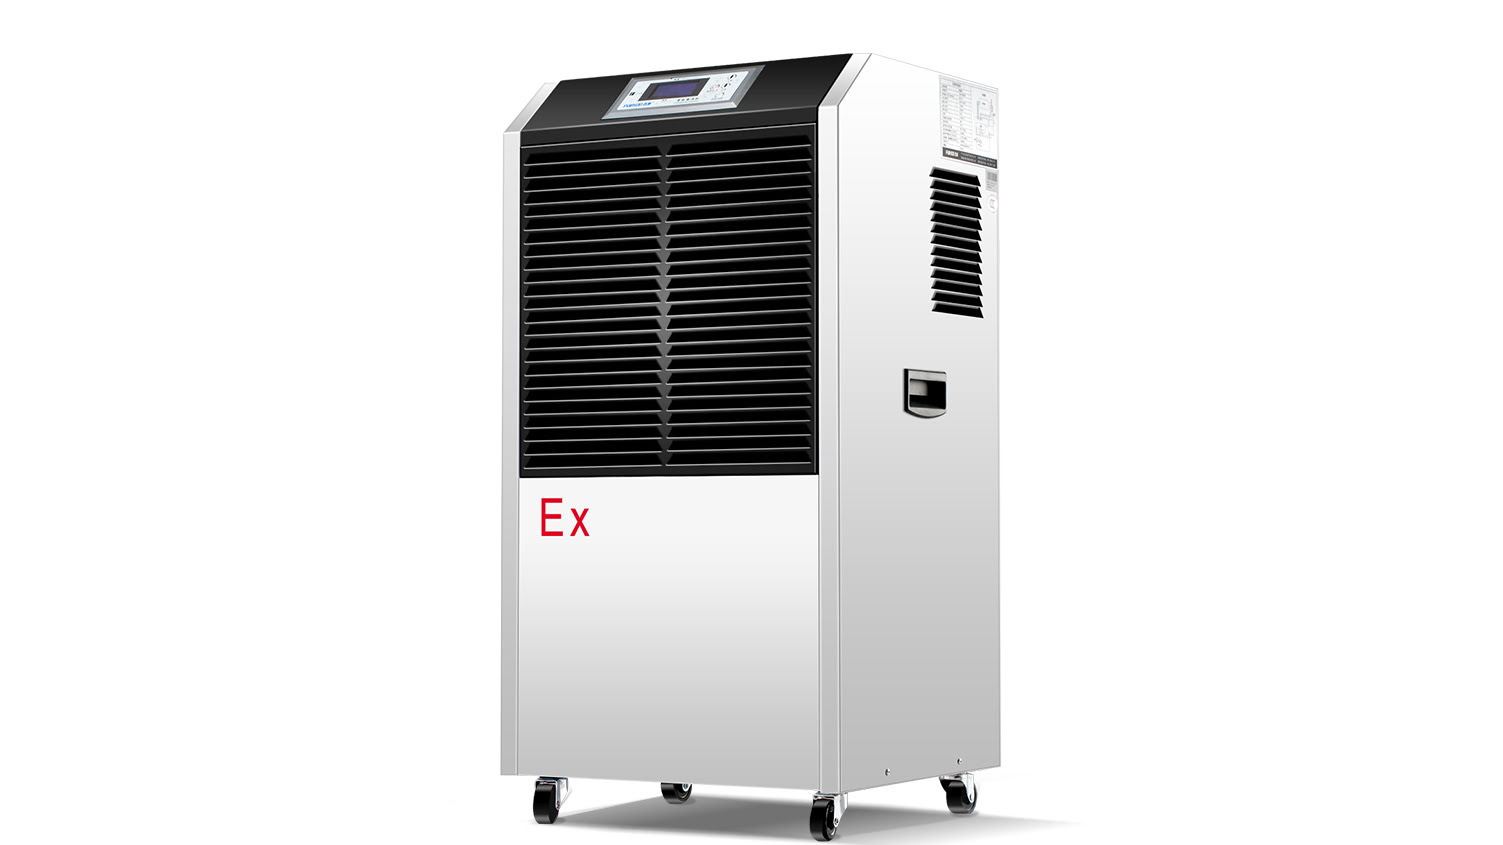 Application of Industrial Explosion proof Dehumidifier in the Worst Environment